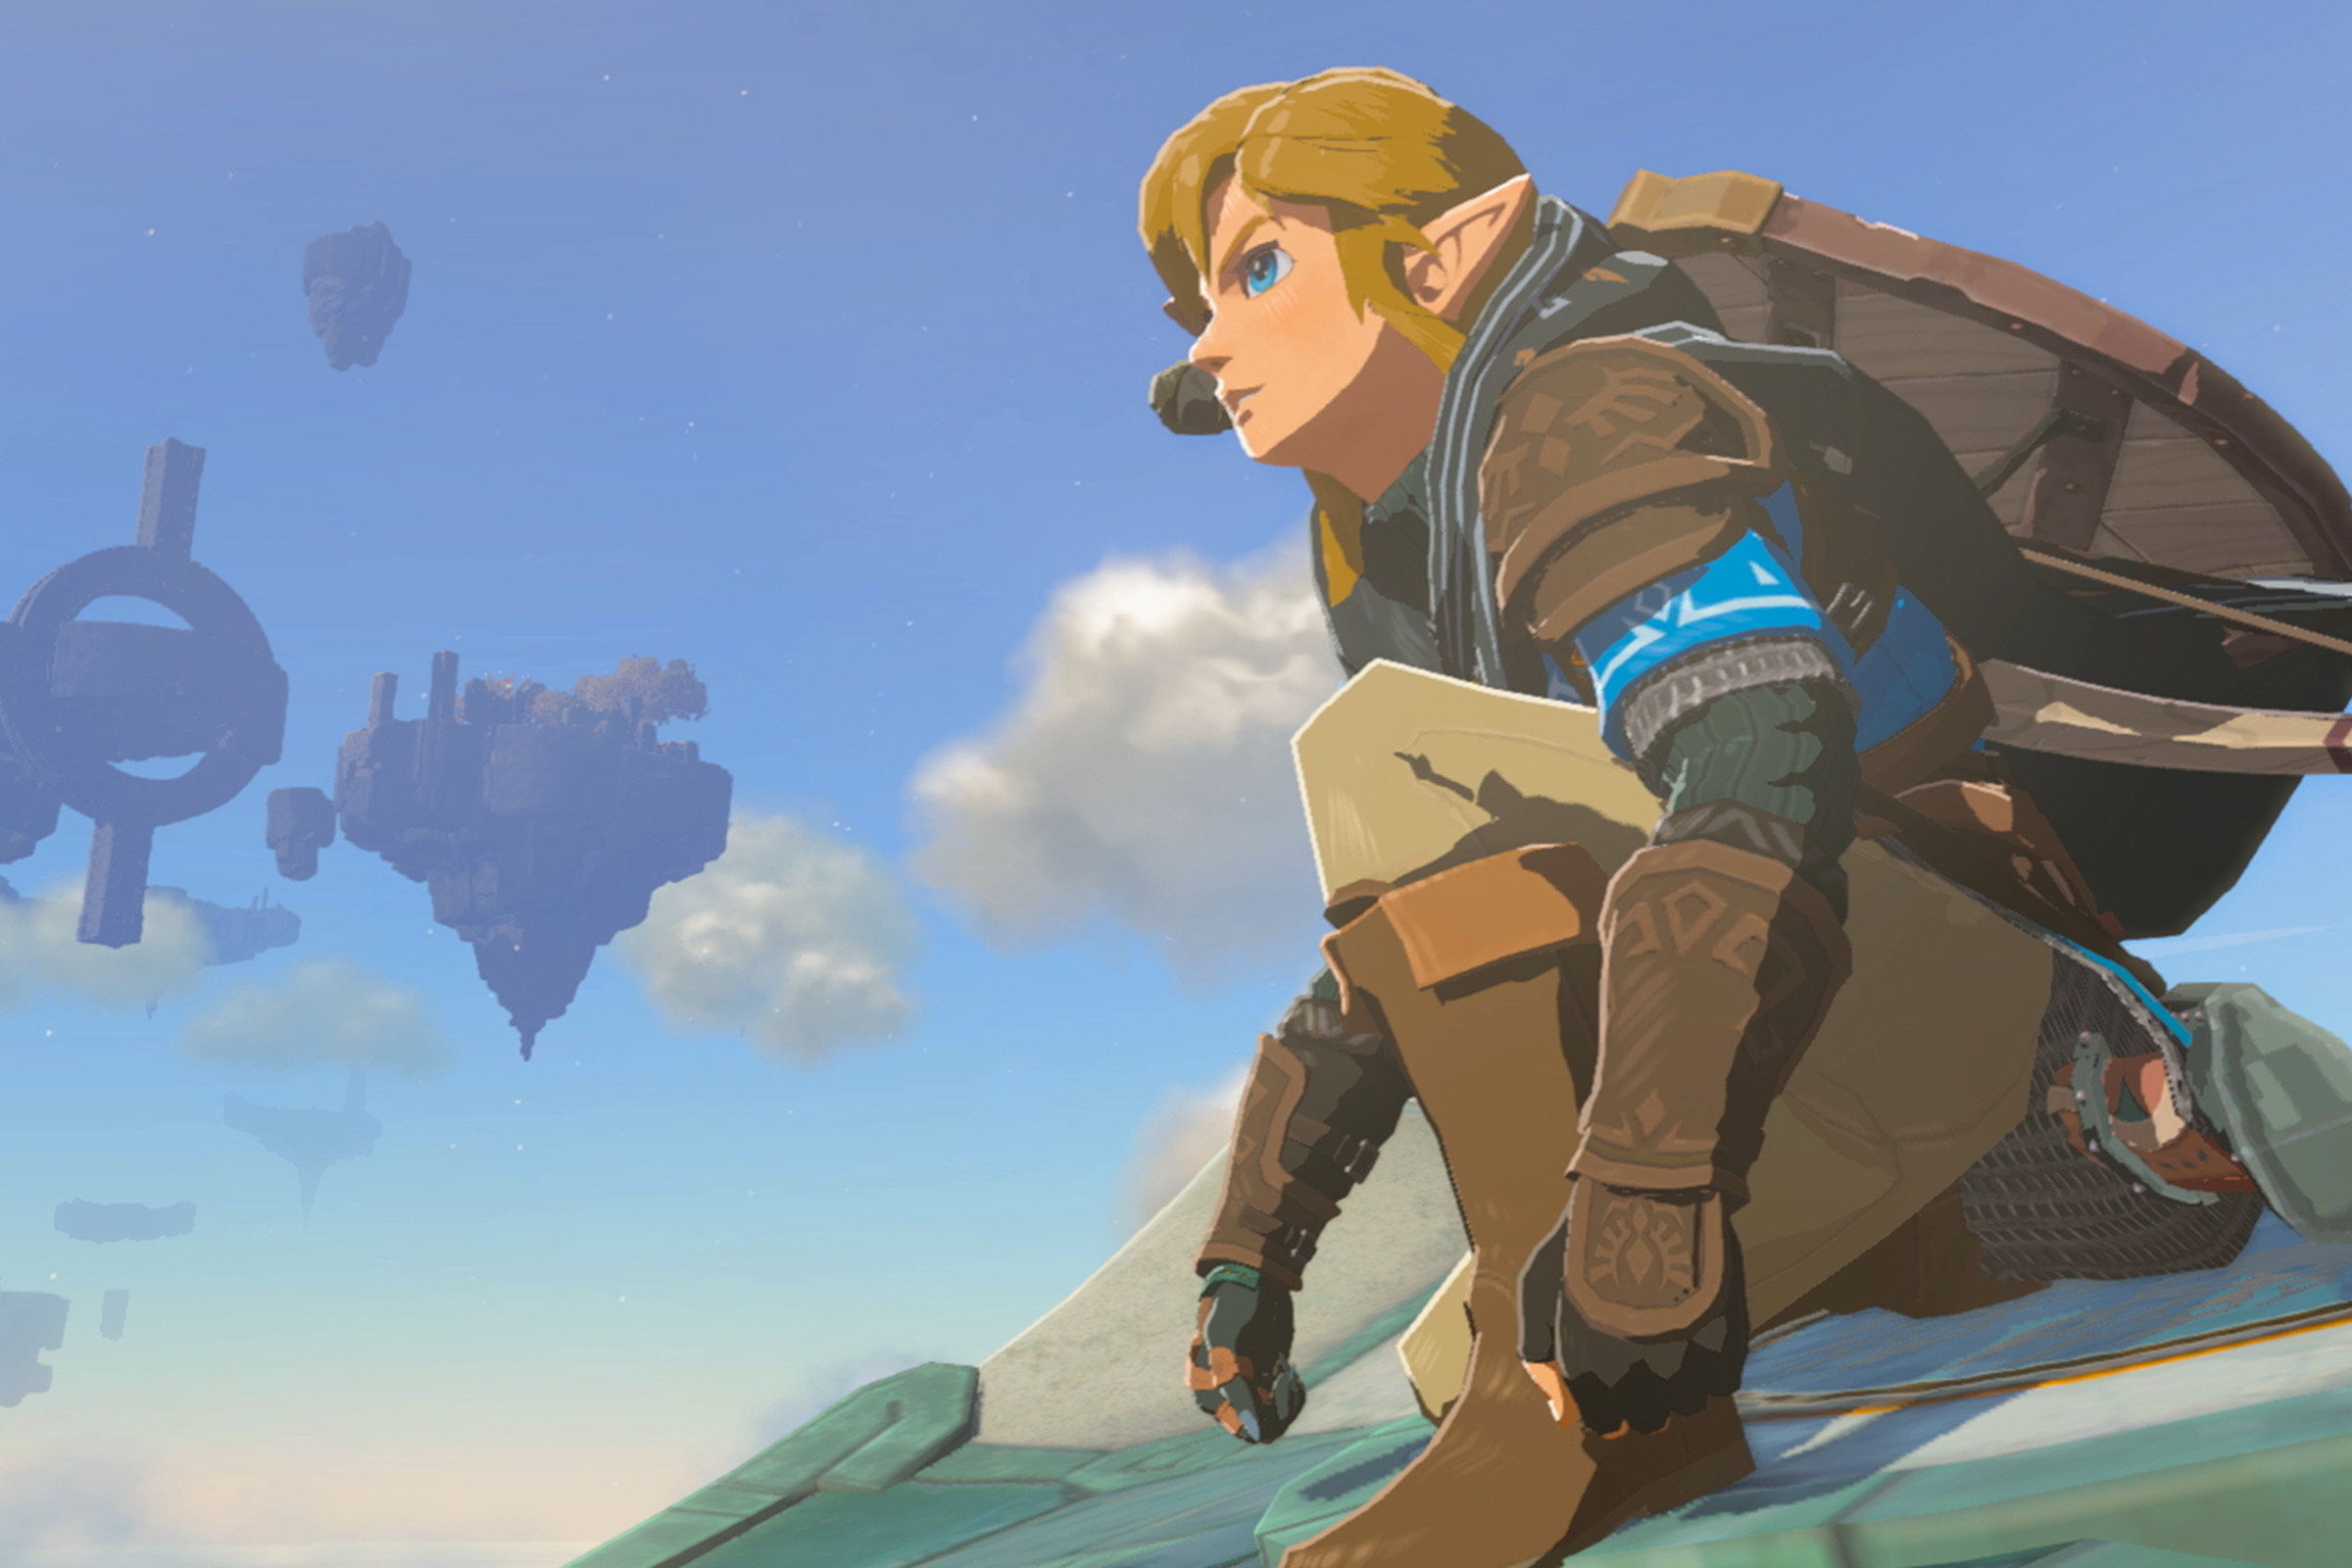 Link on a Wing glider in the sky in a screenshot for The Legend of Zelda: Tears of the Kingdom.